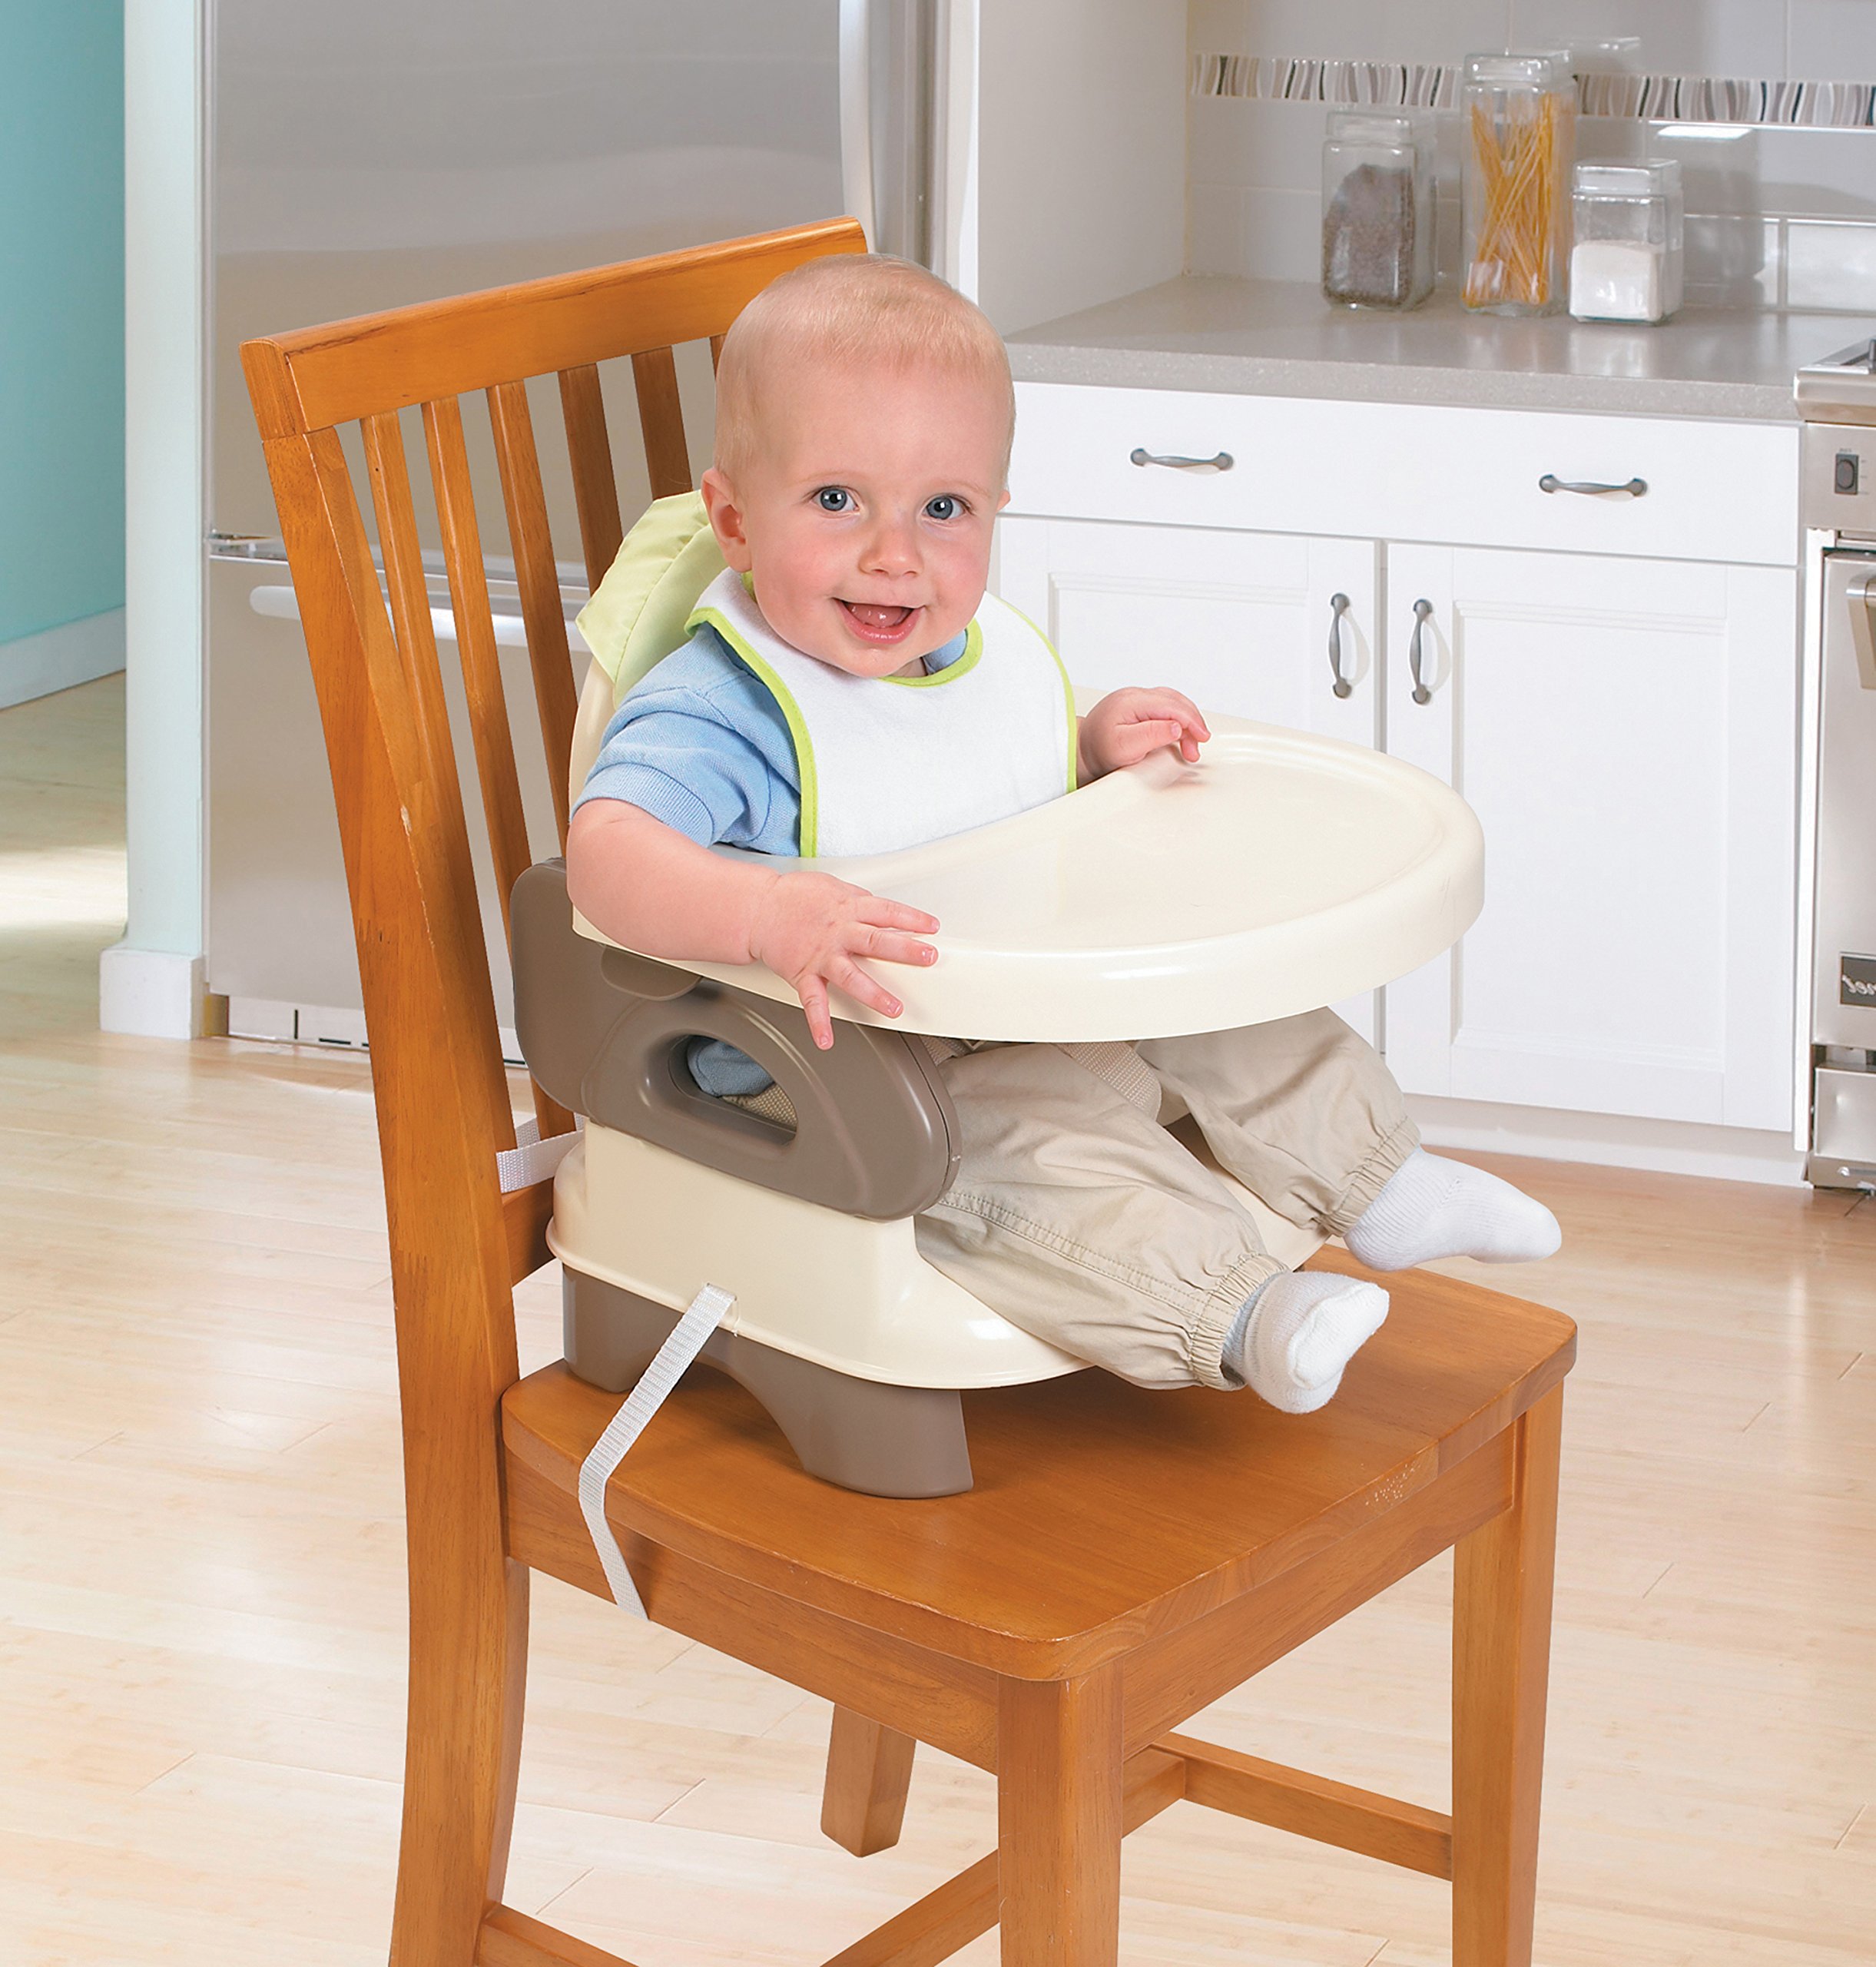 Summer Deluxe Comfort Folding Booster Seat (Neutral) - image 4 of 6